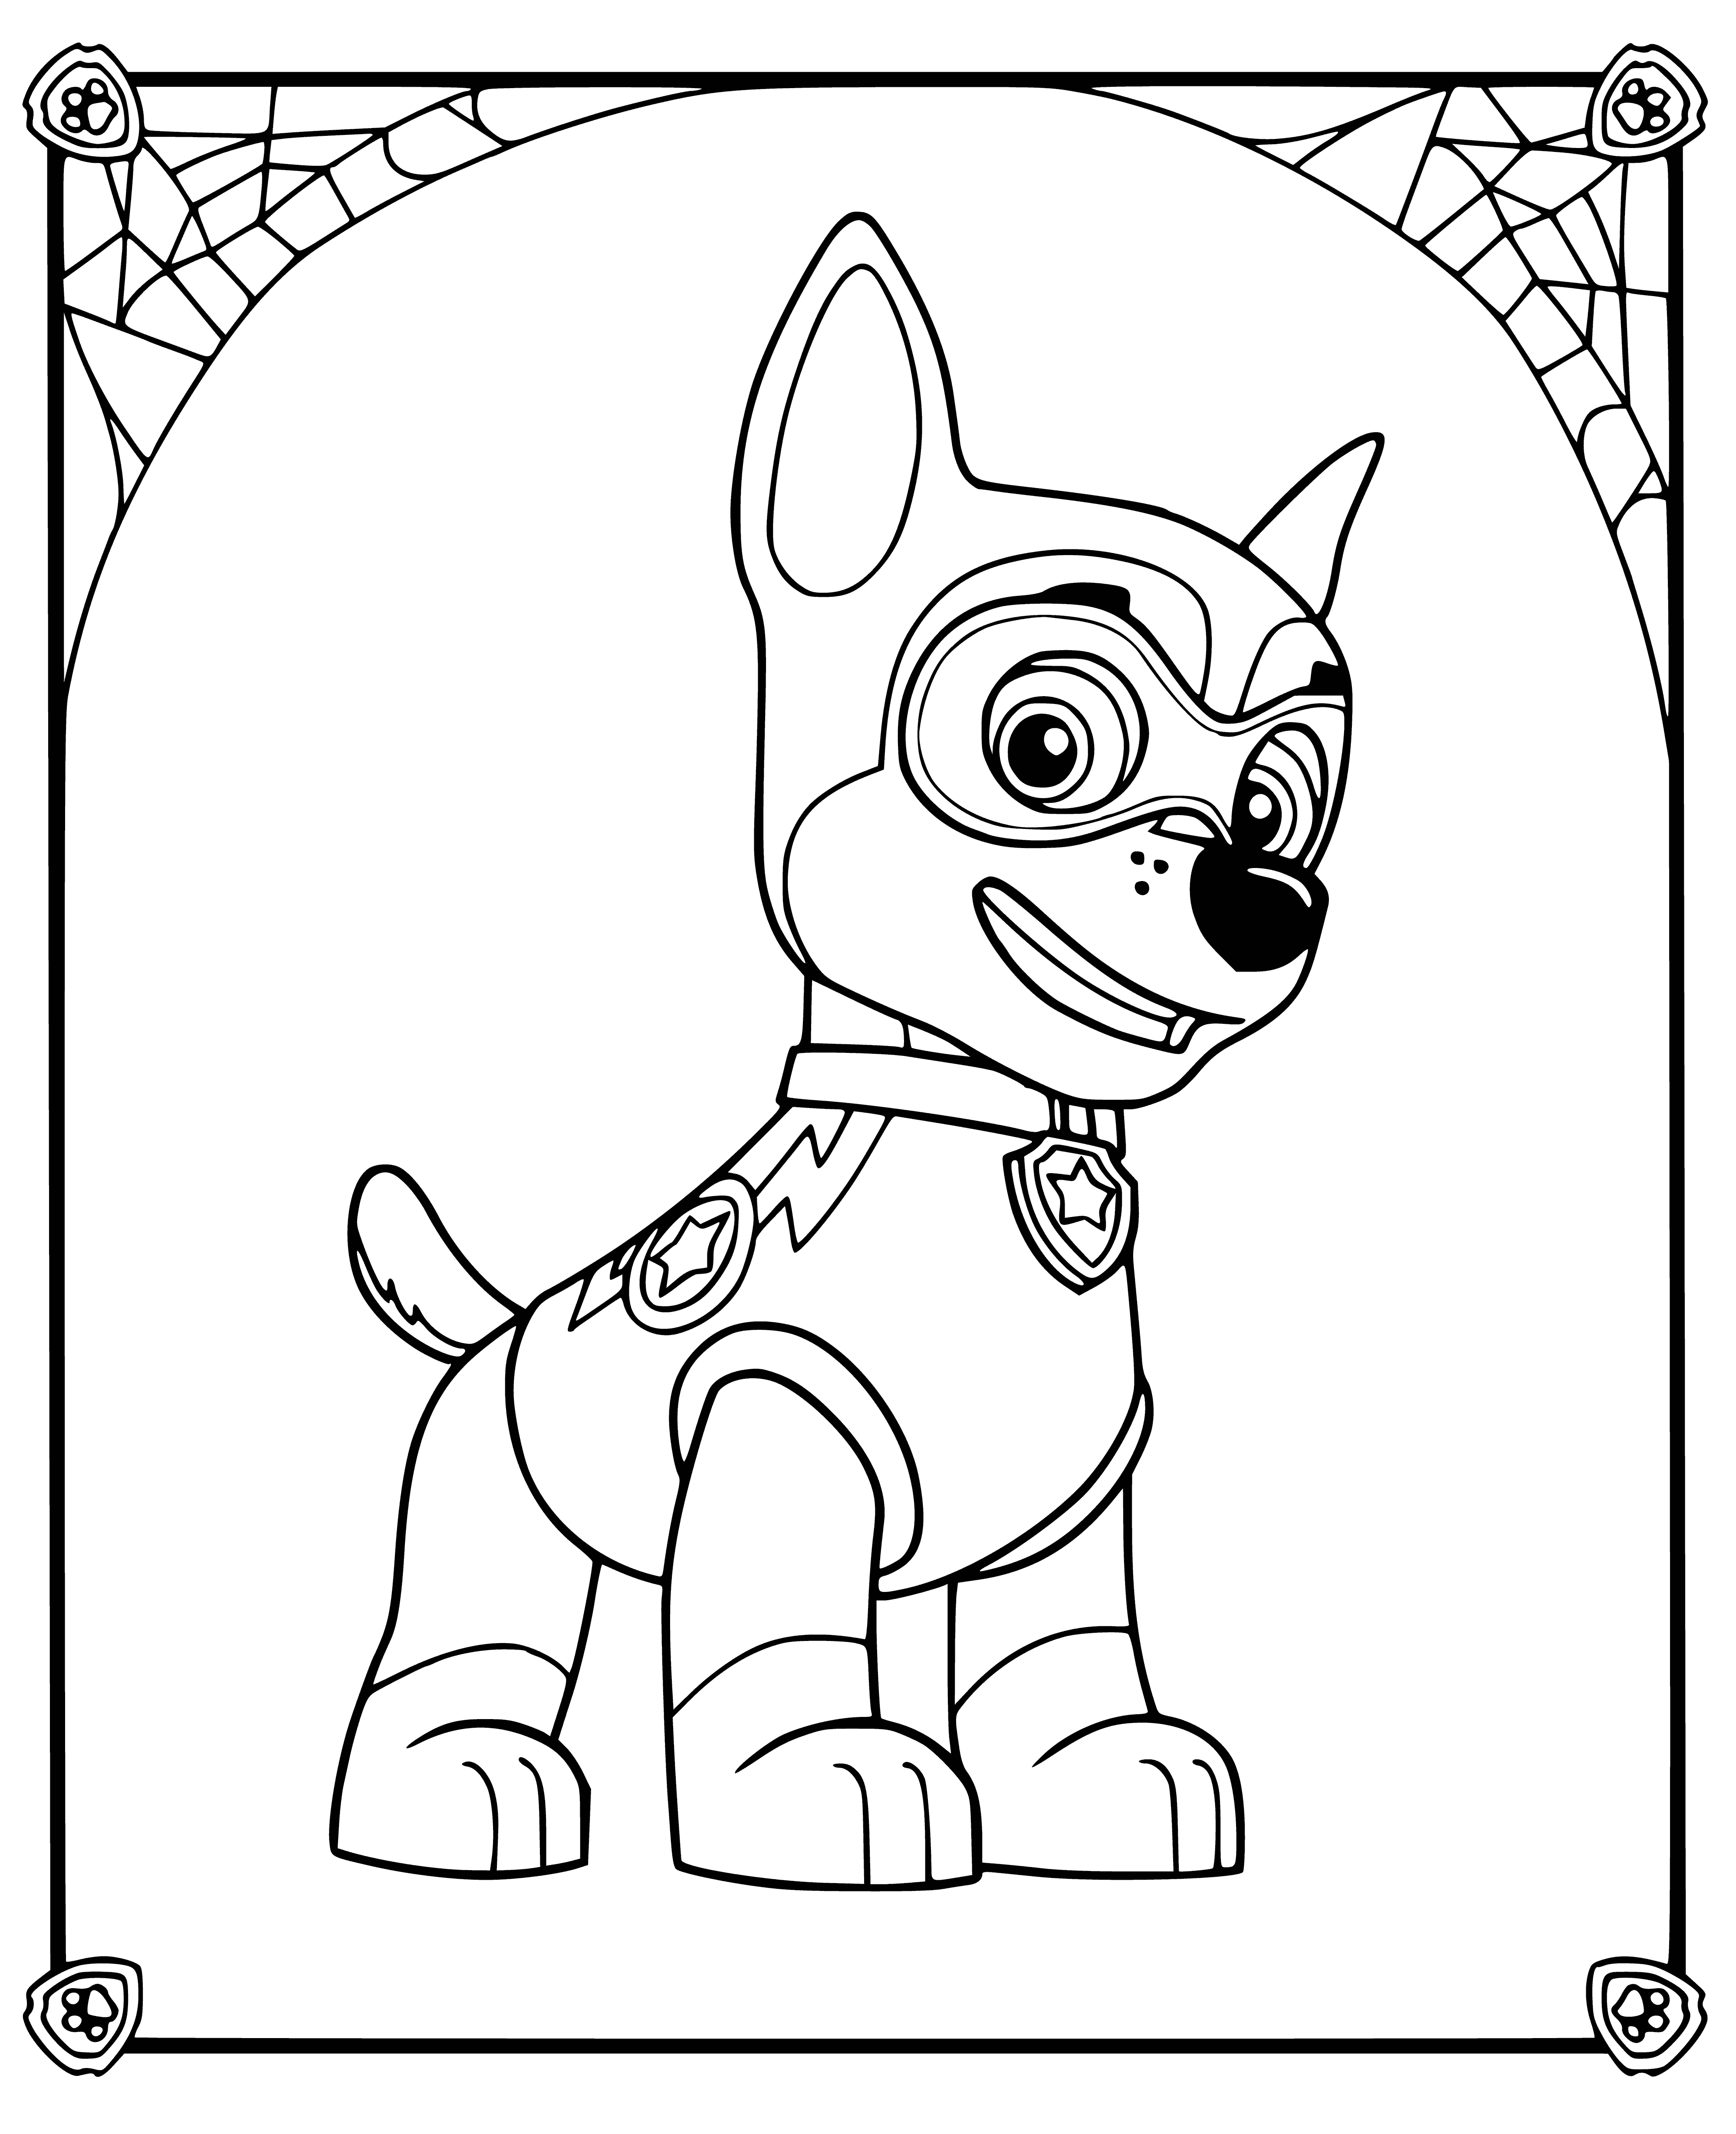 Racer - Lightning coloring page